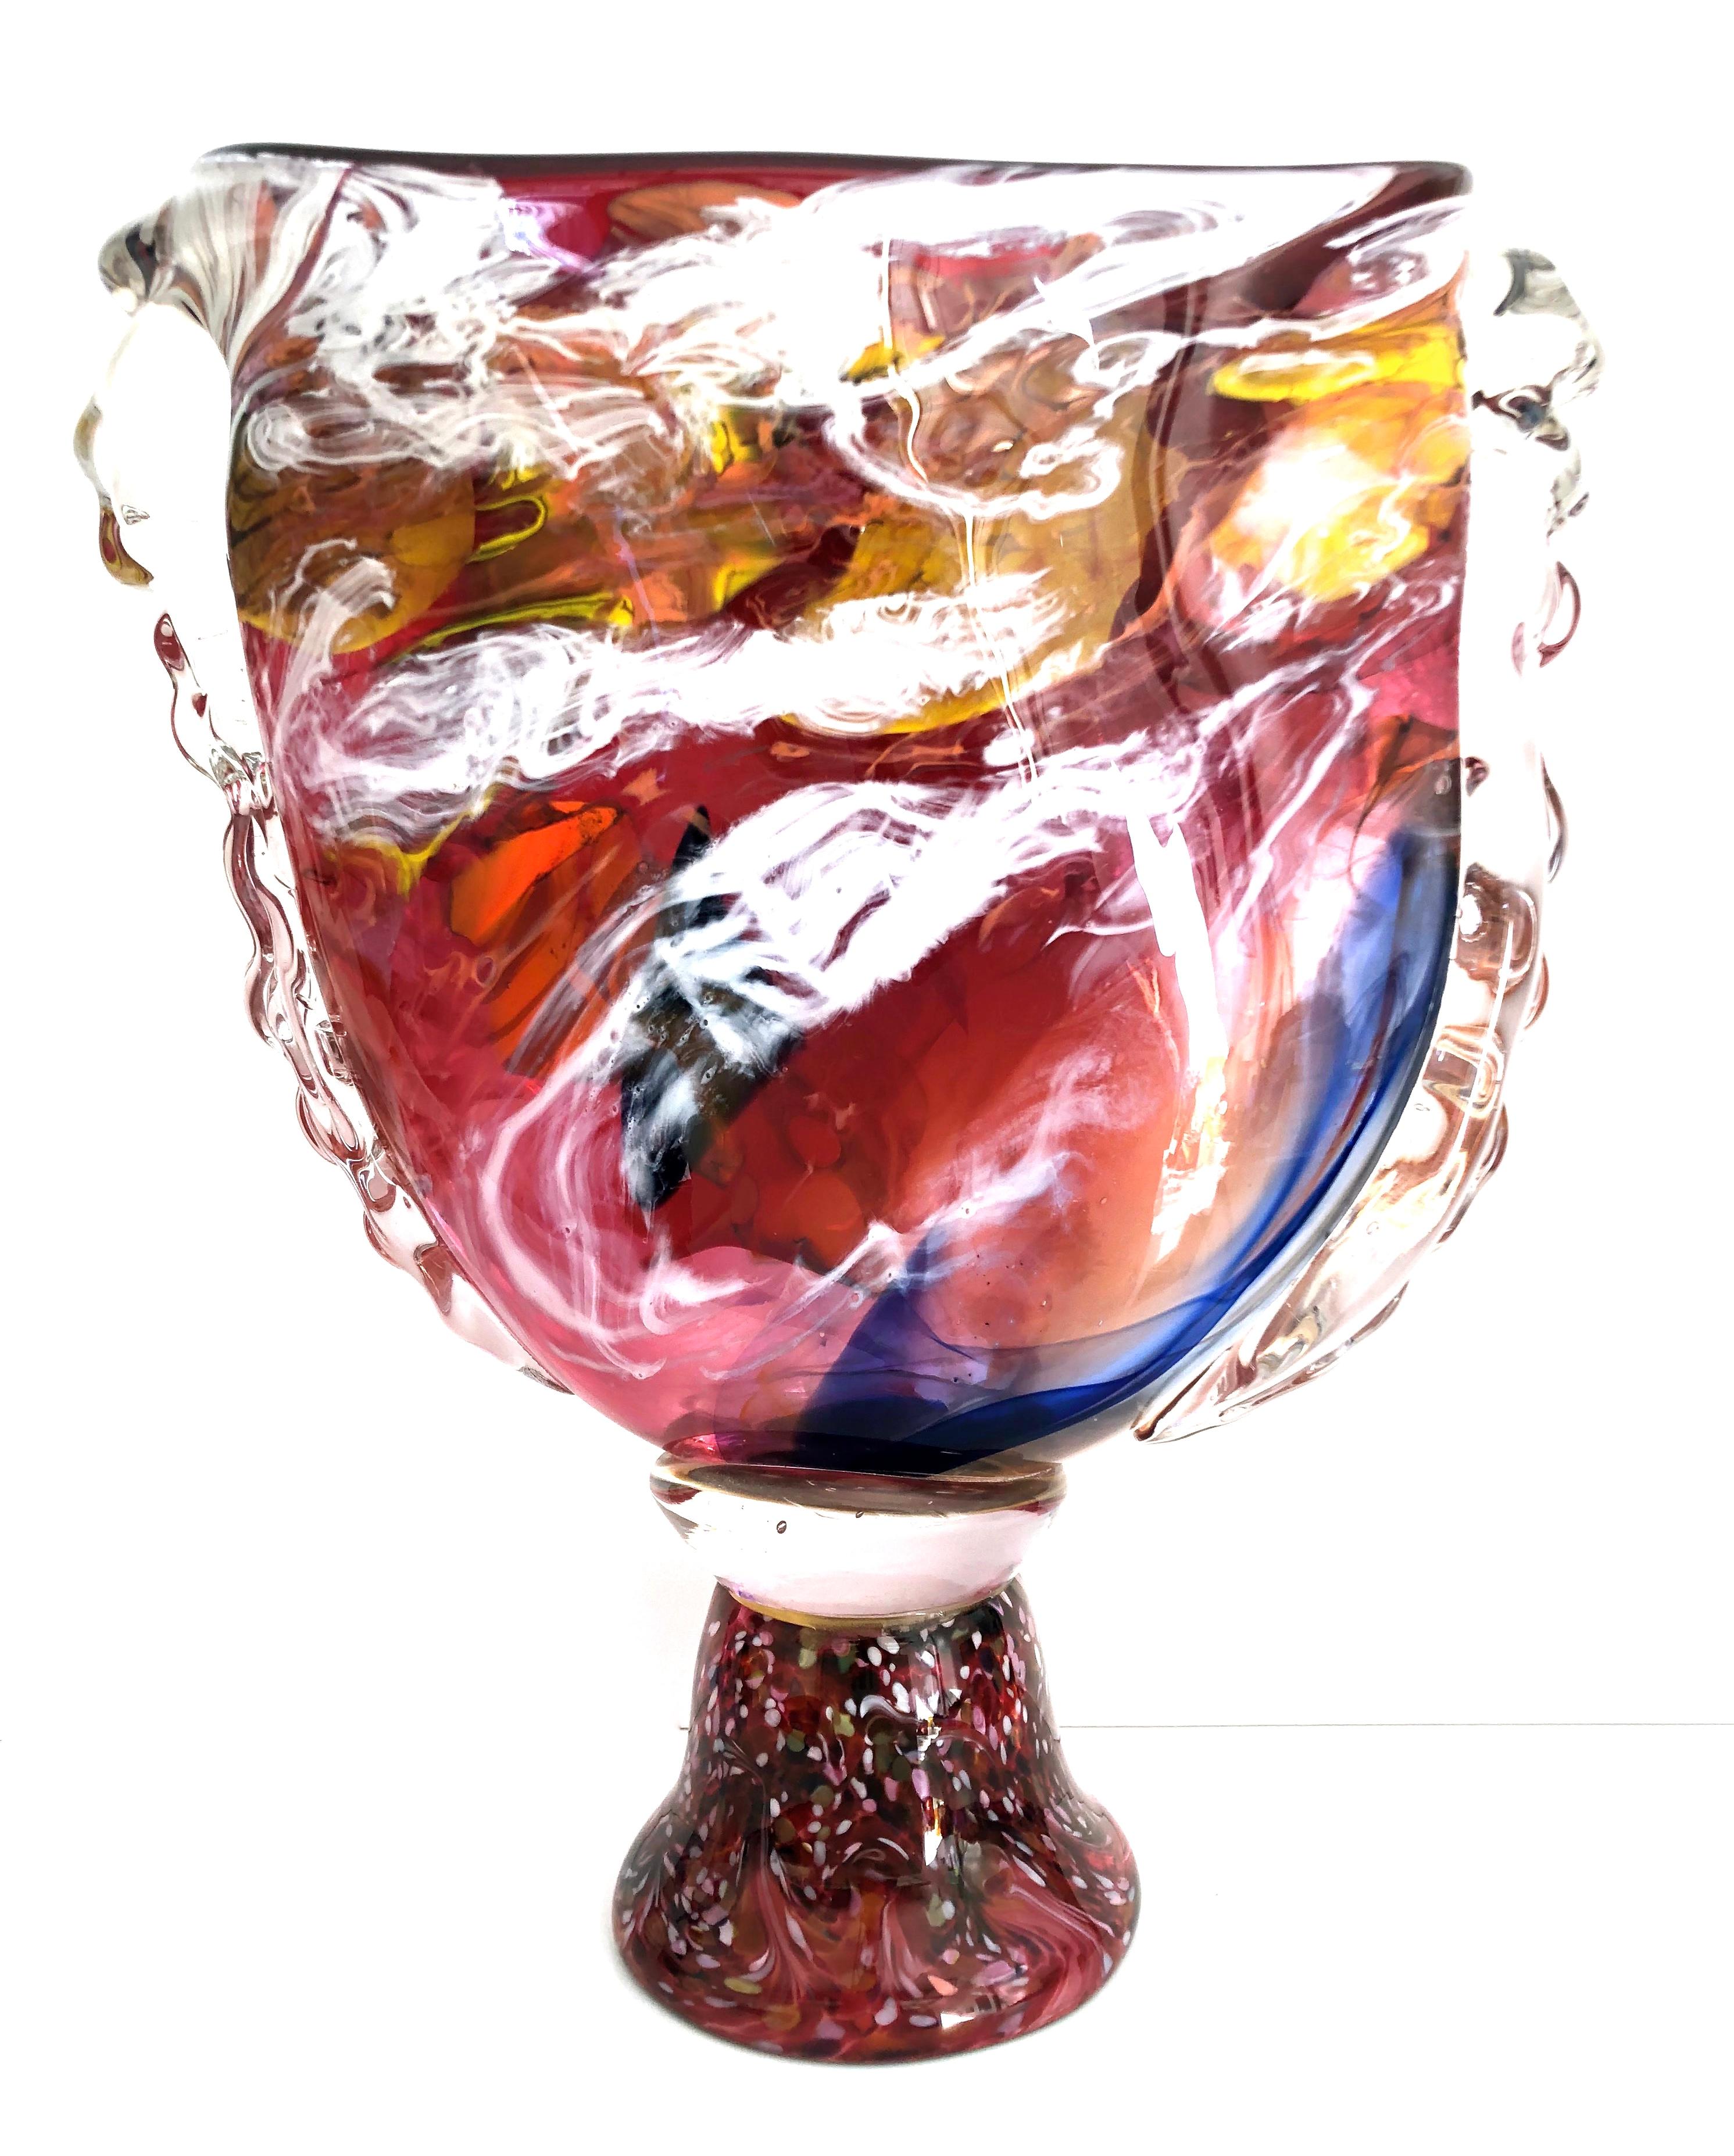 Large Abstract Art Glass Vase  - Sculpture by Vasile Laznianu